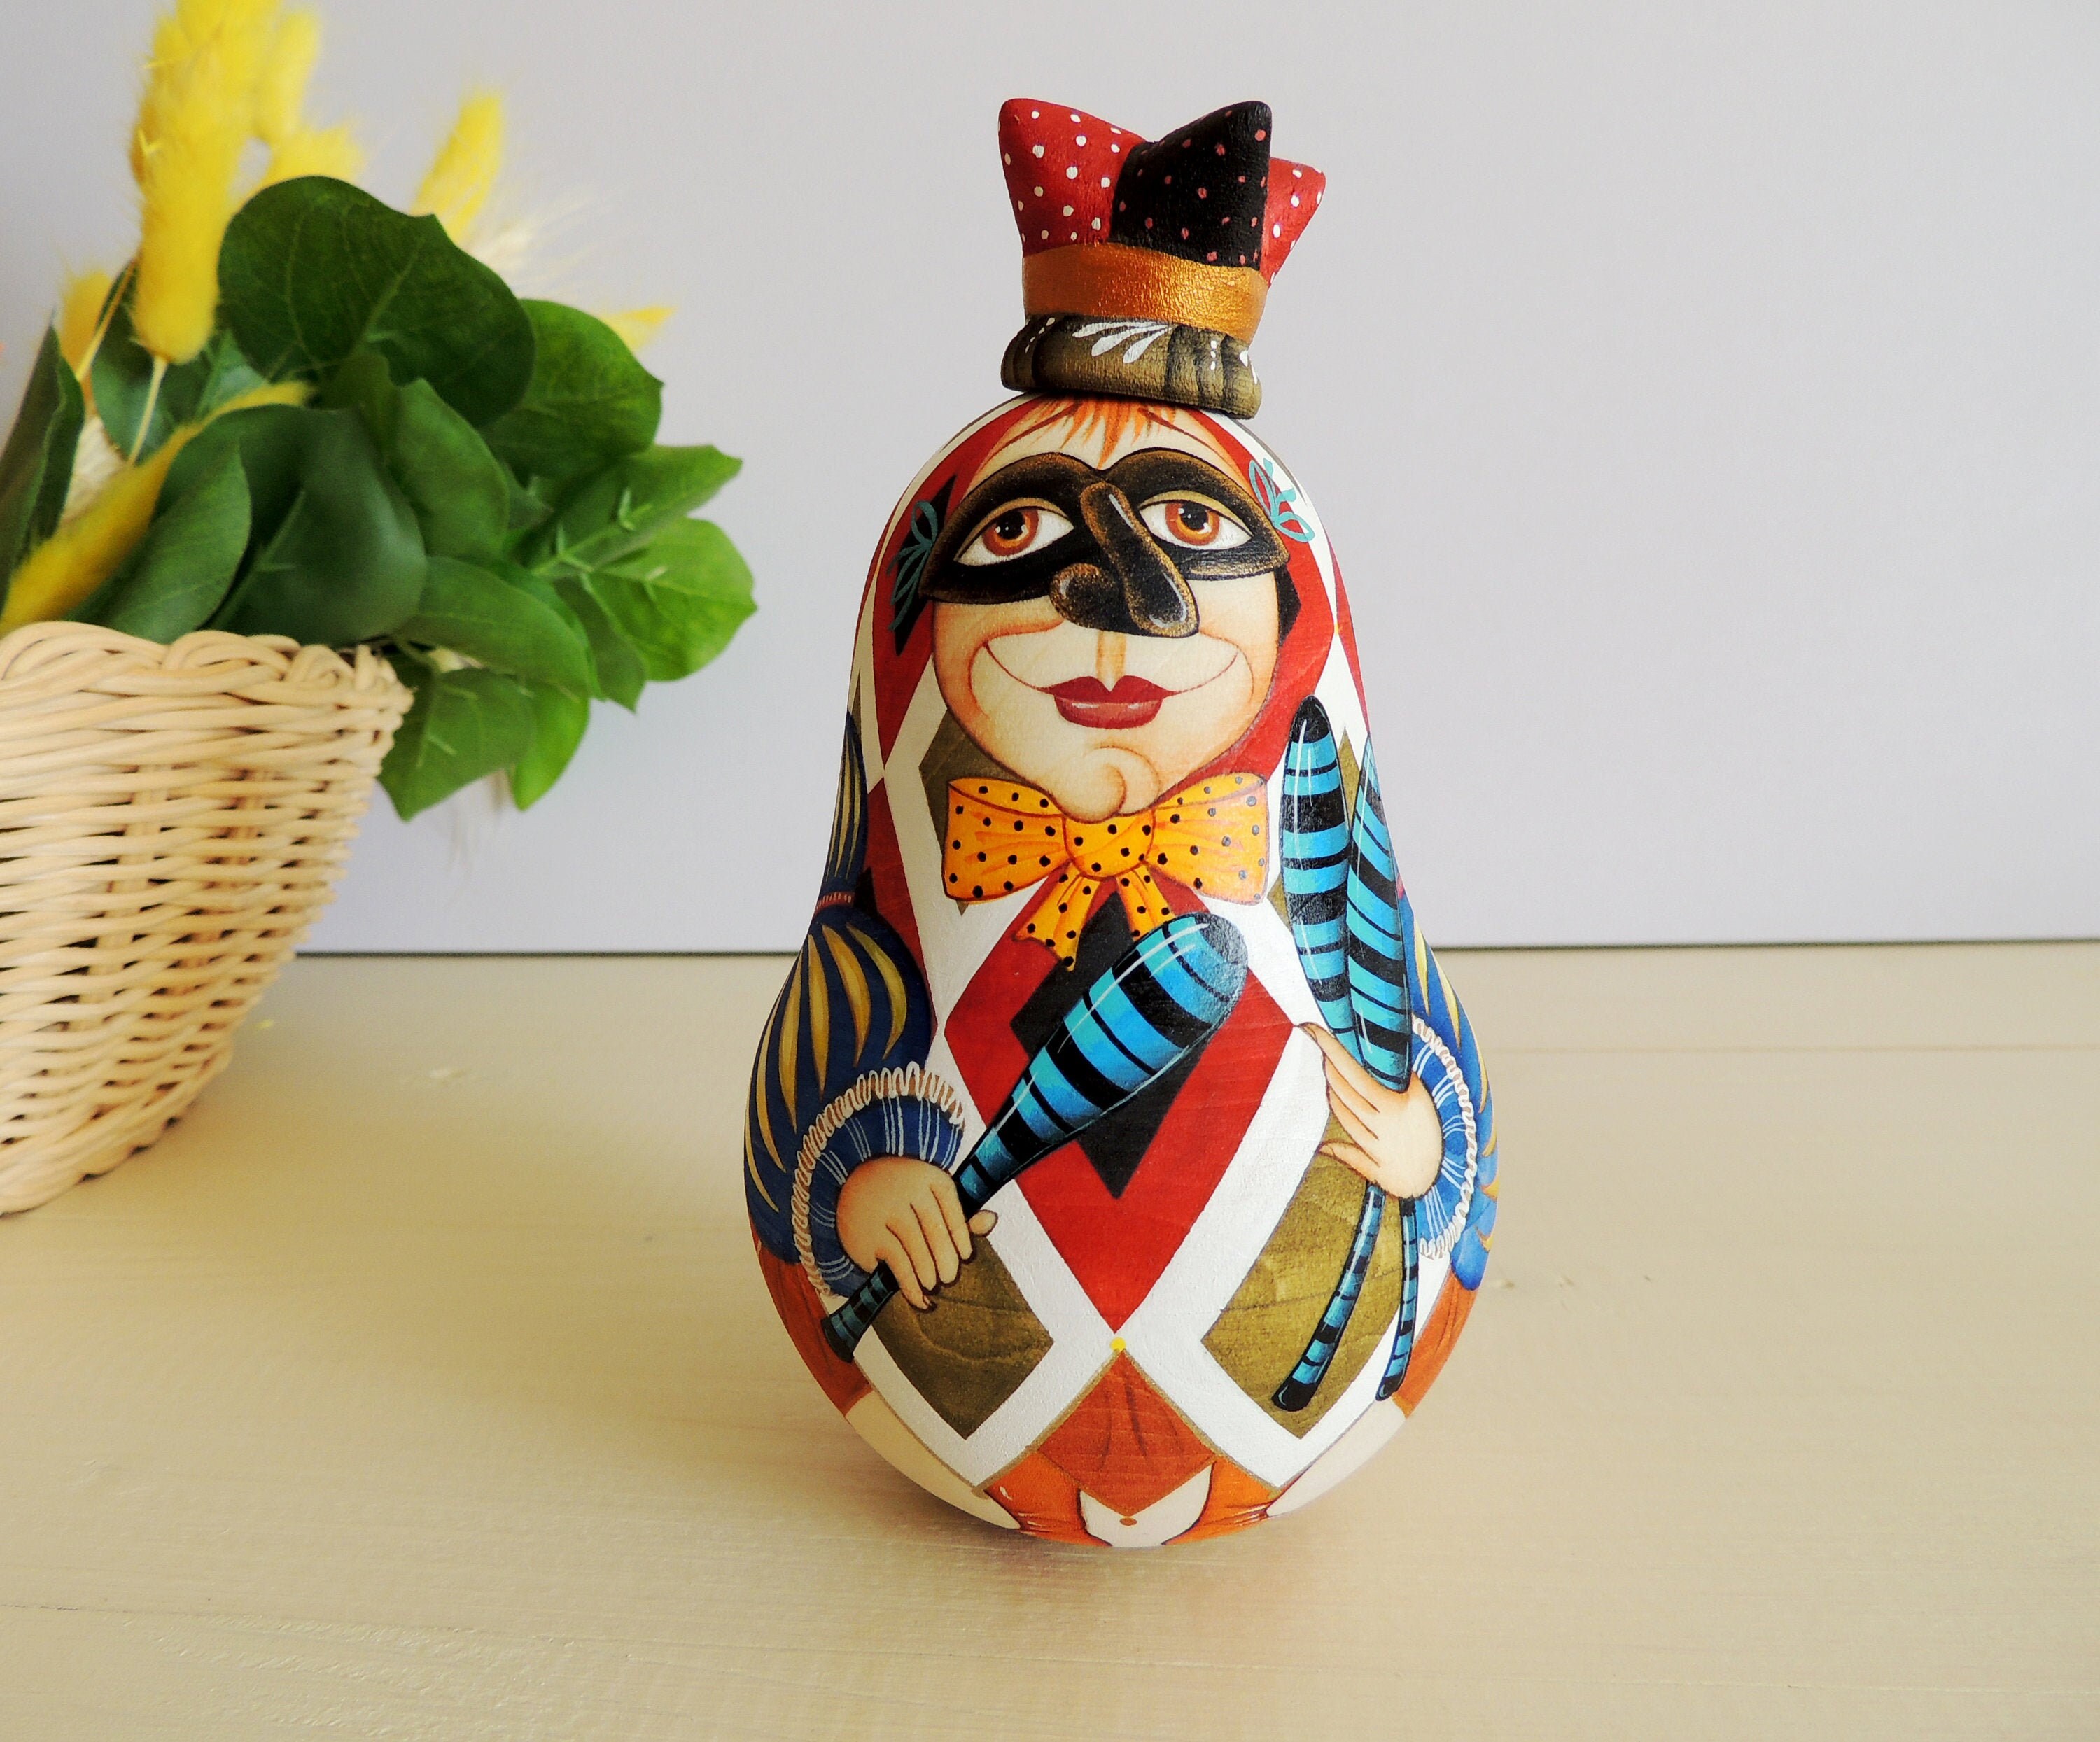 Russian Wooden Toy Roly Poly doll 